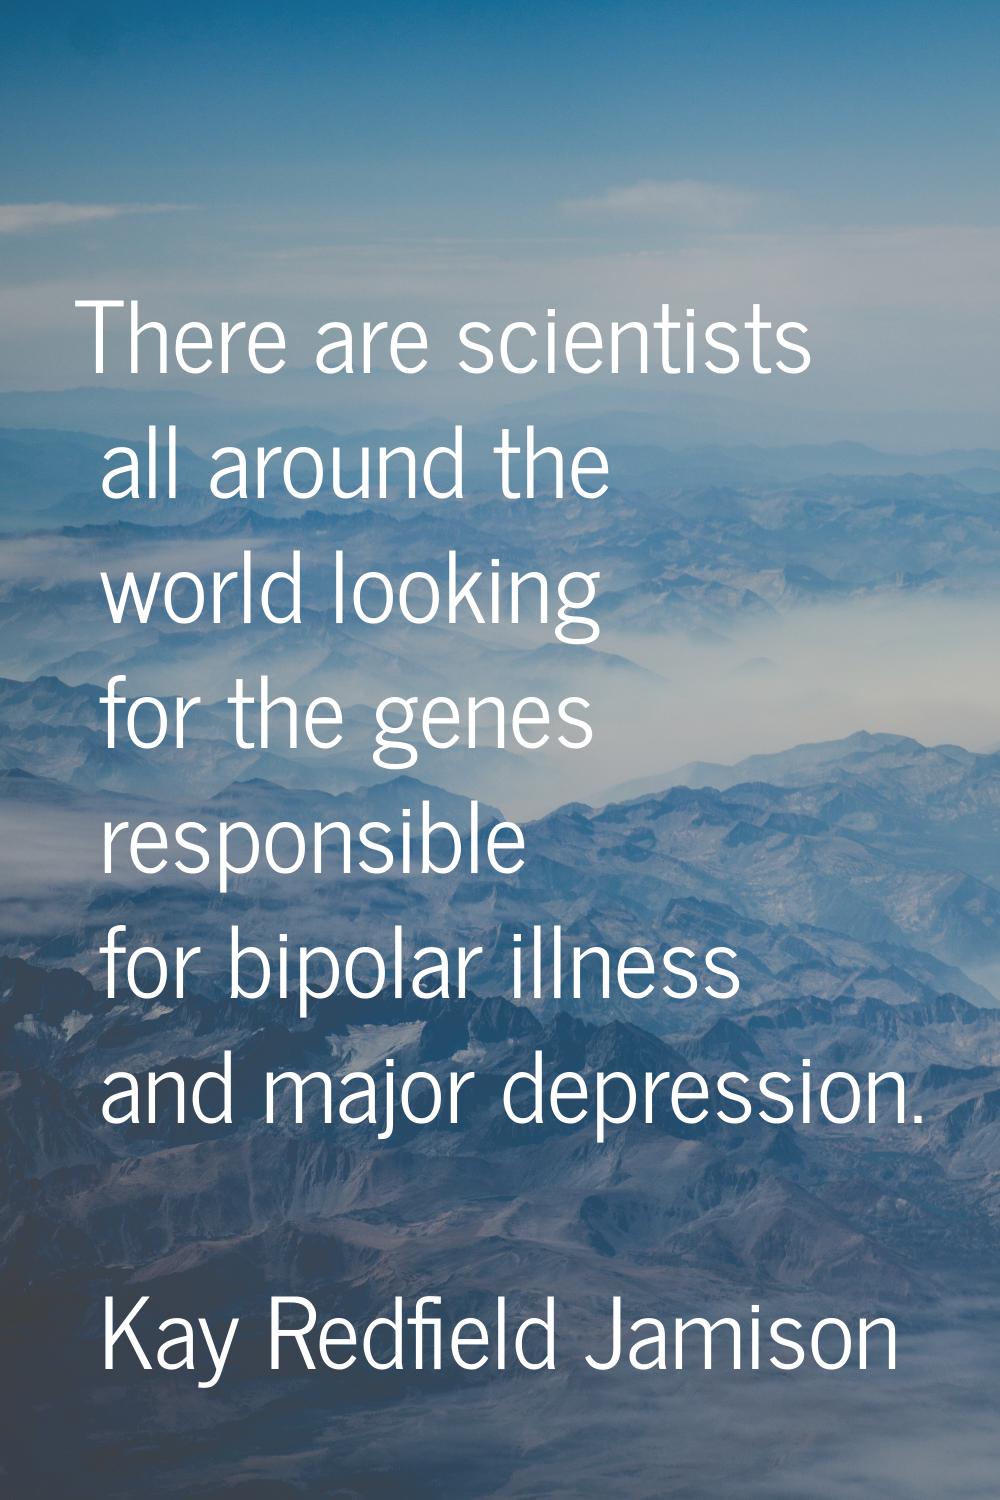 There are scientists all around the world looking for the genes responsible for bipolar illness and